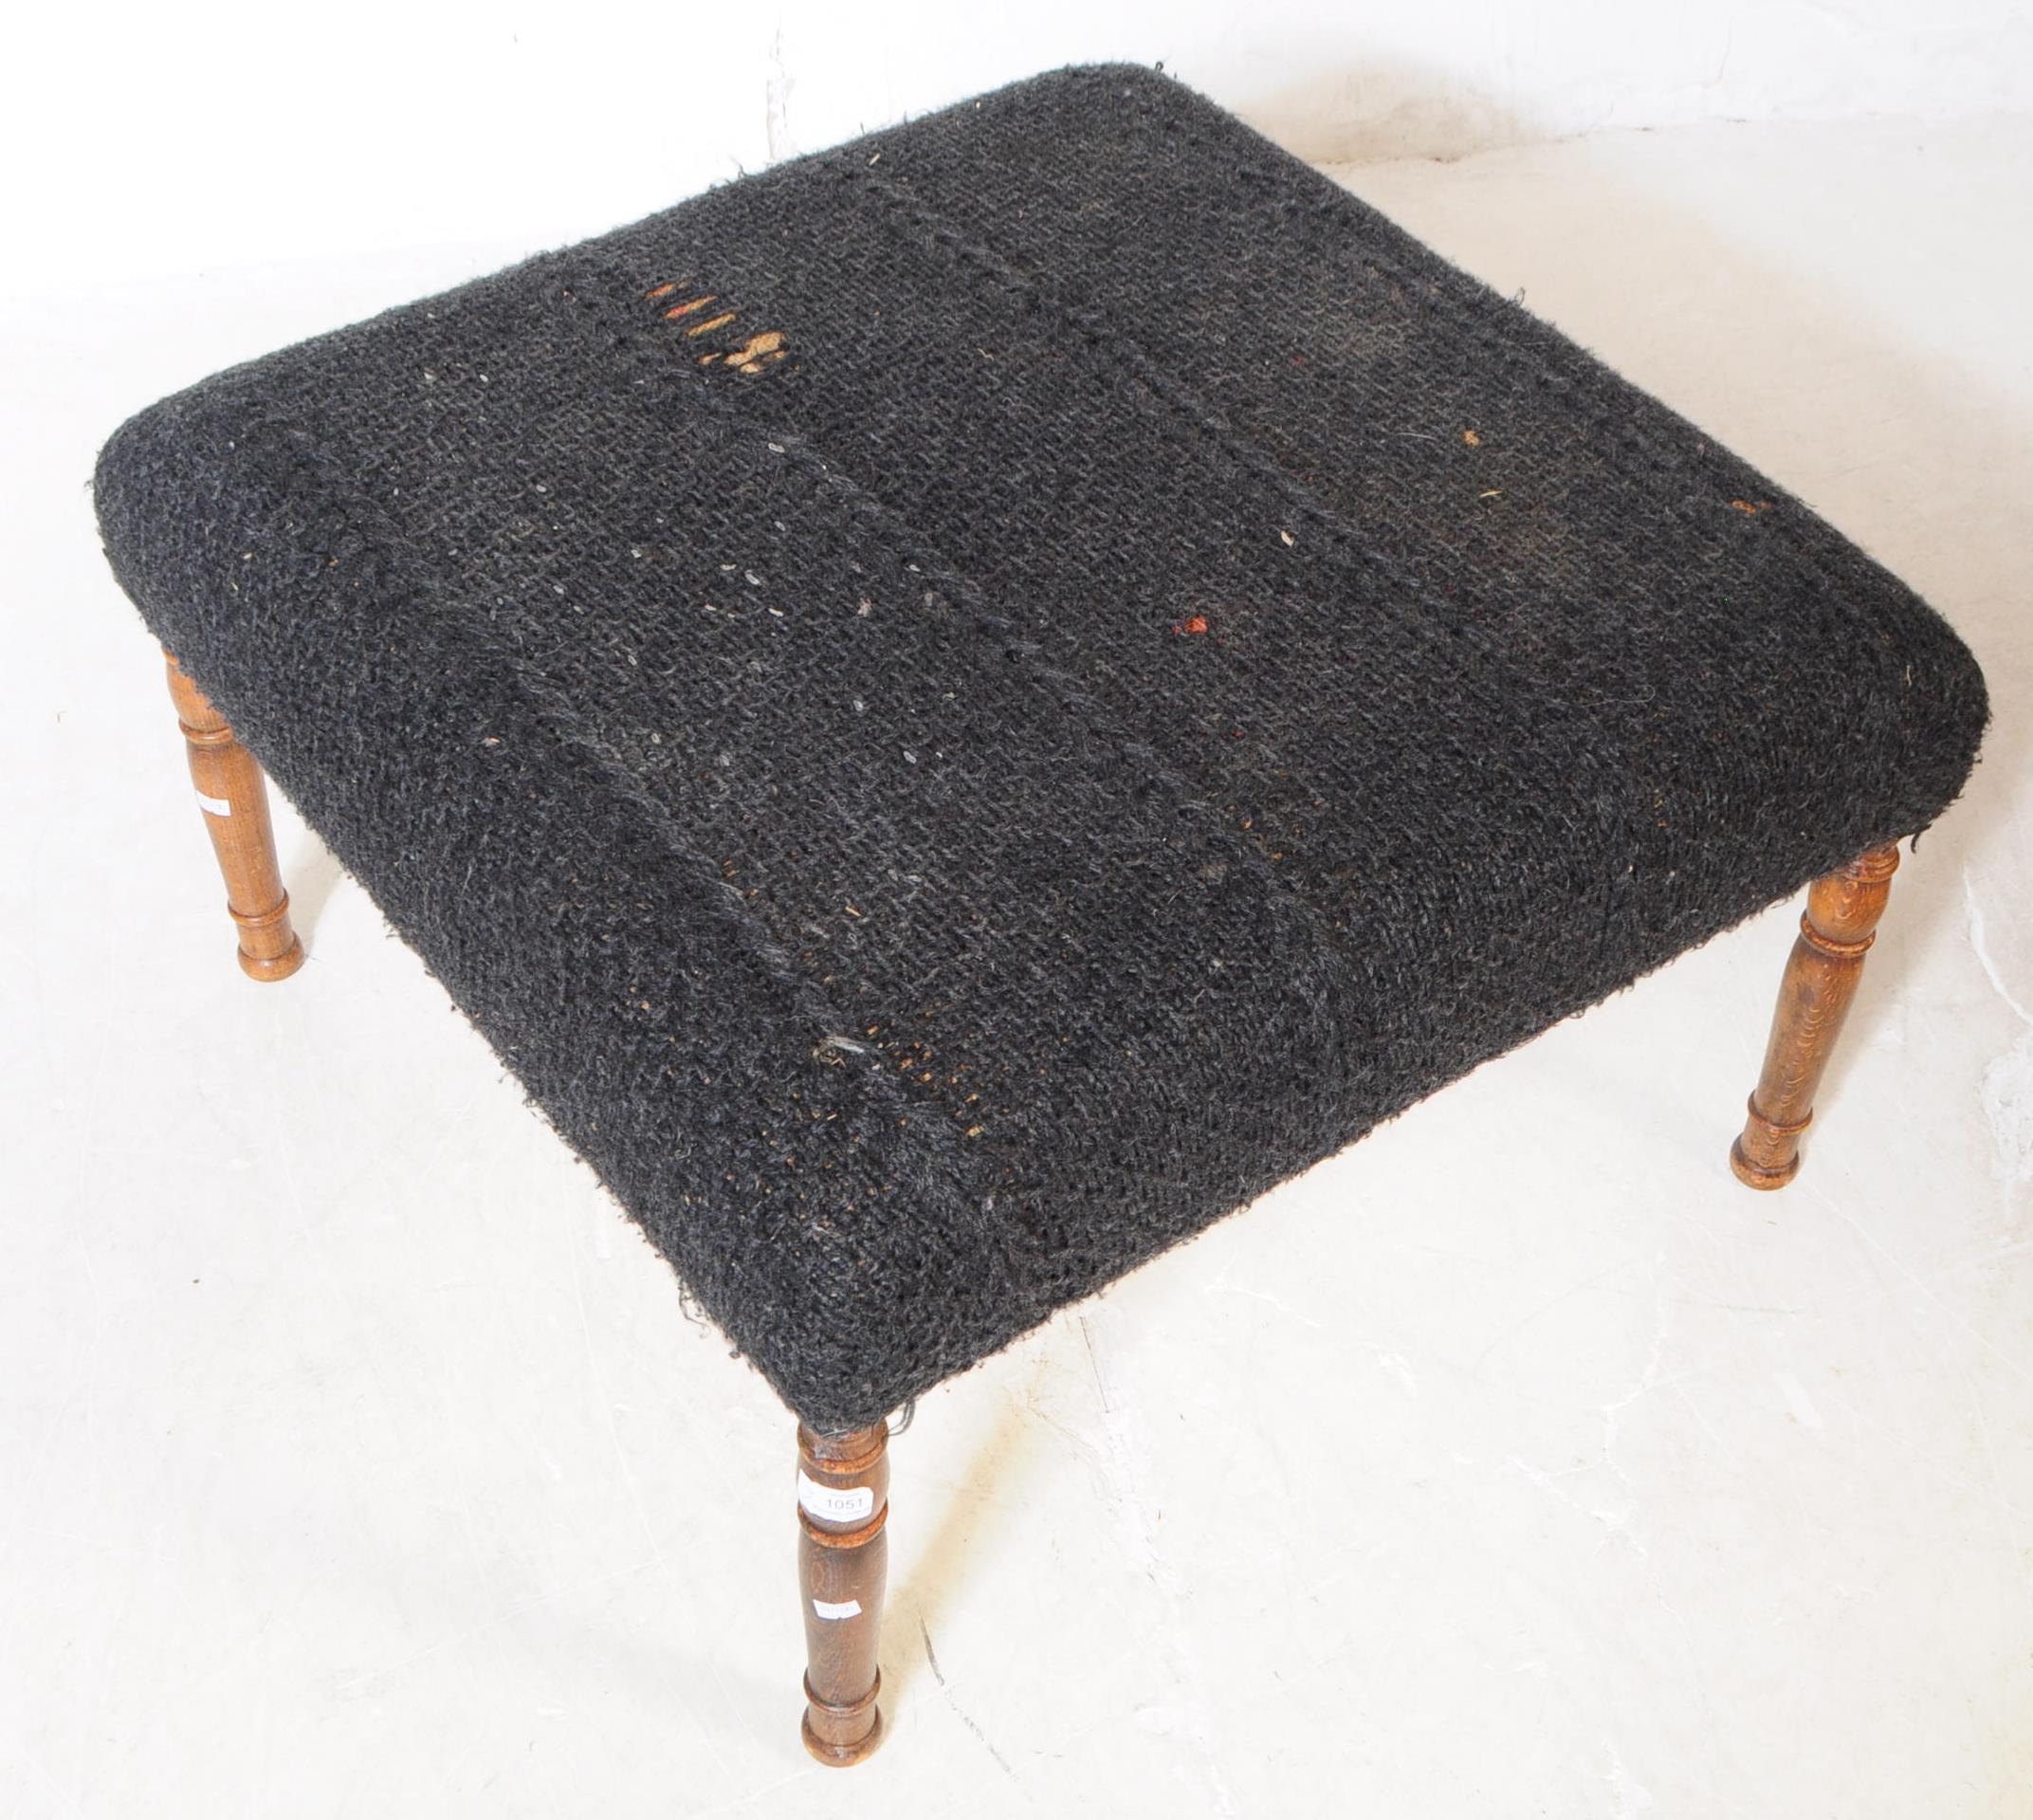 EARLY 20TH CENTURY BLACK UPHOLSTERY OTTOMAN - Image 2 of 4